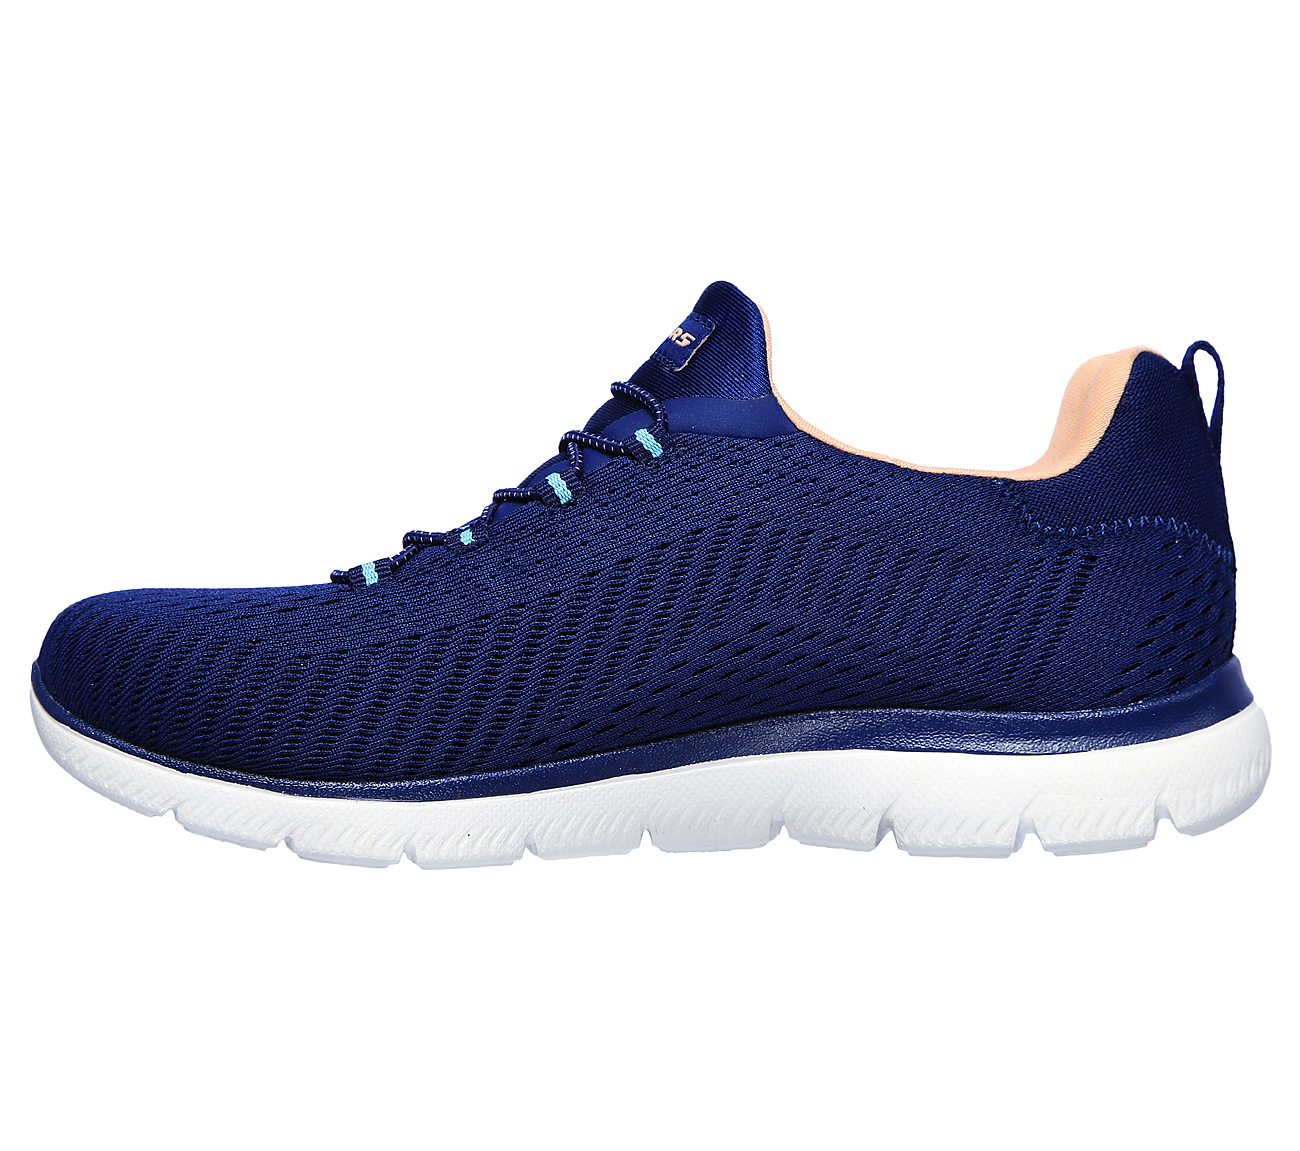 SUMMITS - FAST ATTRACTION, NAVY/CORAL Footwear Left View